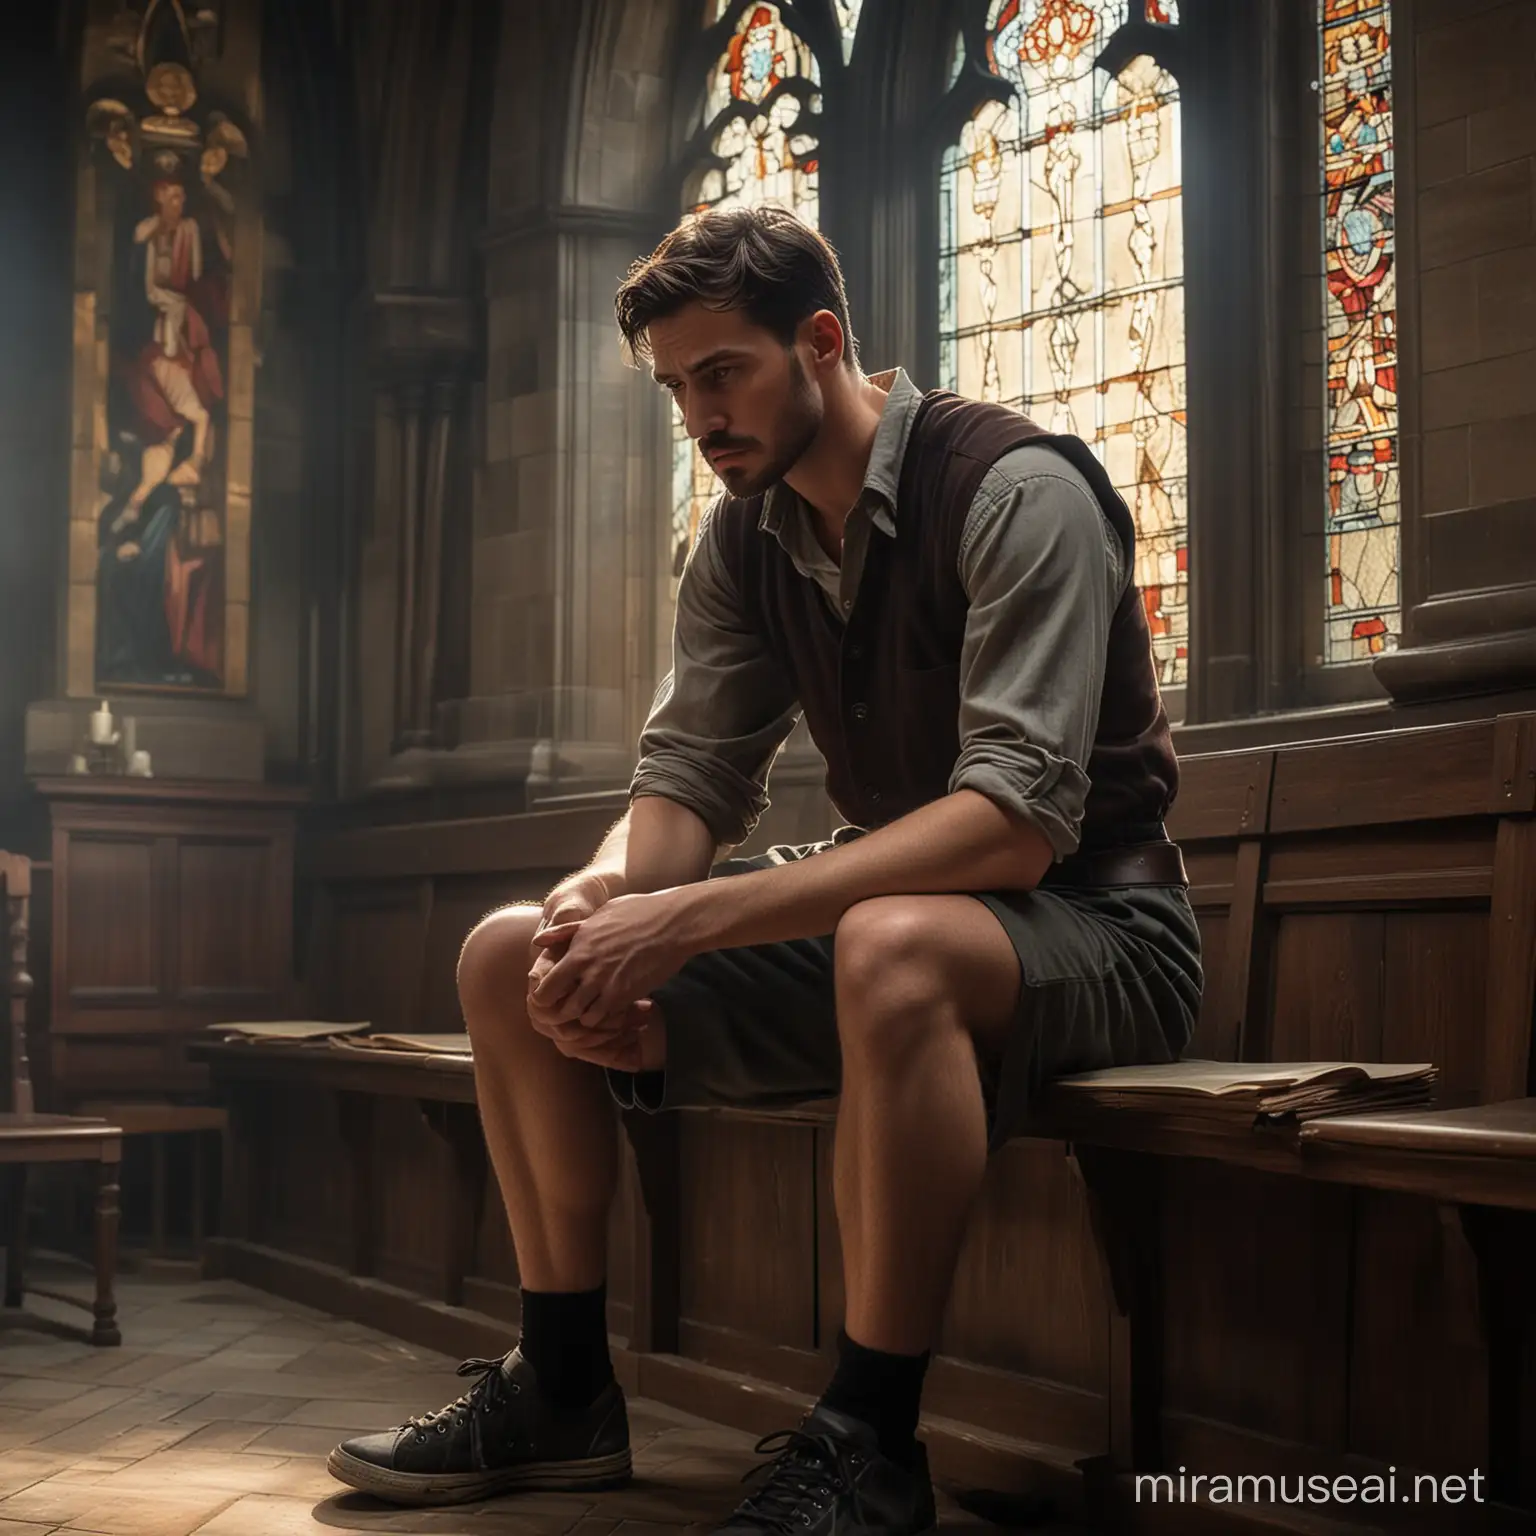 Create a visually striking artwork depicting a dark, somber scene of a solitary figure: a tall, broad, and stocky man seated in a dimly lit church library showing traditional stained glass. The man has black hair, broad shoulders, and an overweight stature with a round belly, dressed in cargo shorts, a collared t-shirt, sneakers, and socks. His expression is stern and brooding, with small eyes, a large nose, and big ears. His hazel eyes pierce through the darkness, conveying a fierce connection to the audience. The man's face is rounded with a double chin, sporting a traditional haircut with a side part, hair on both his arms and legs, and a short beard covering his chin and both sides of his face. The overall color palette should be dark, with shades of brown and maroon dominating the scene. The man is depicted alone, absorbed in his thoughts, and staring intensely into the distance, adding depth and emotion to the composition.